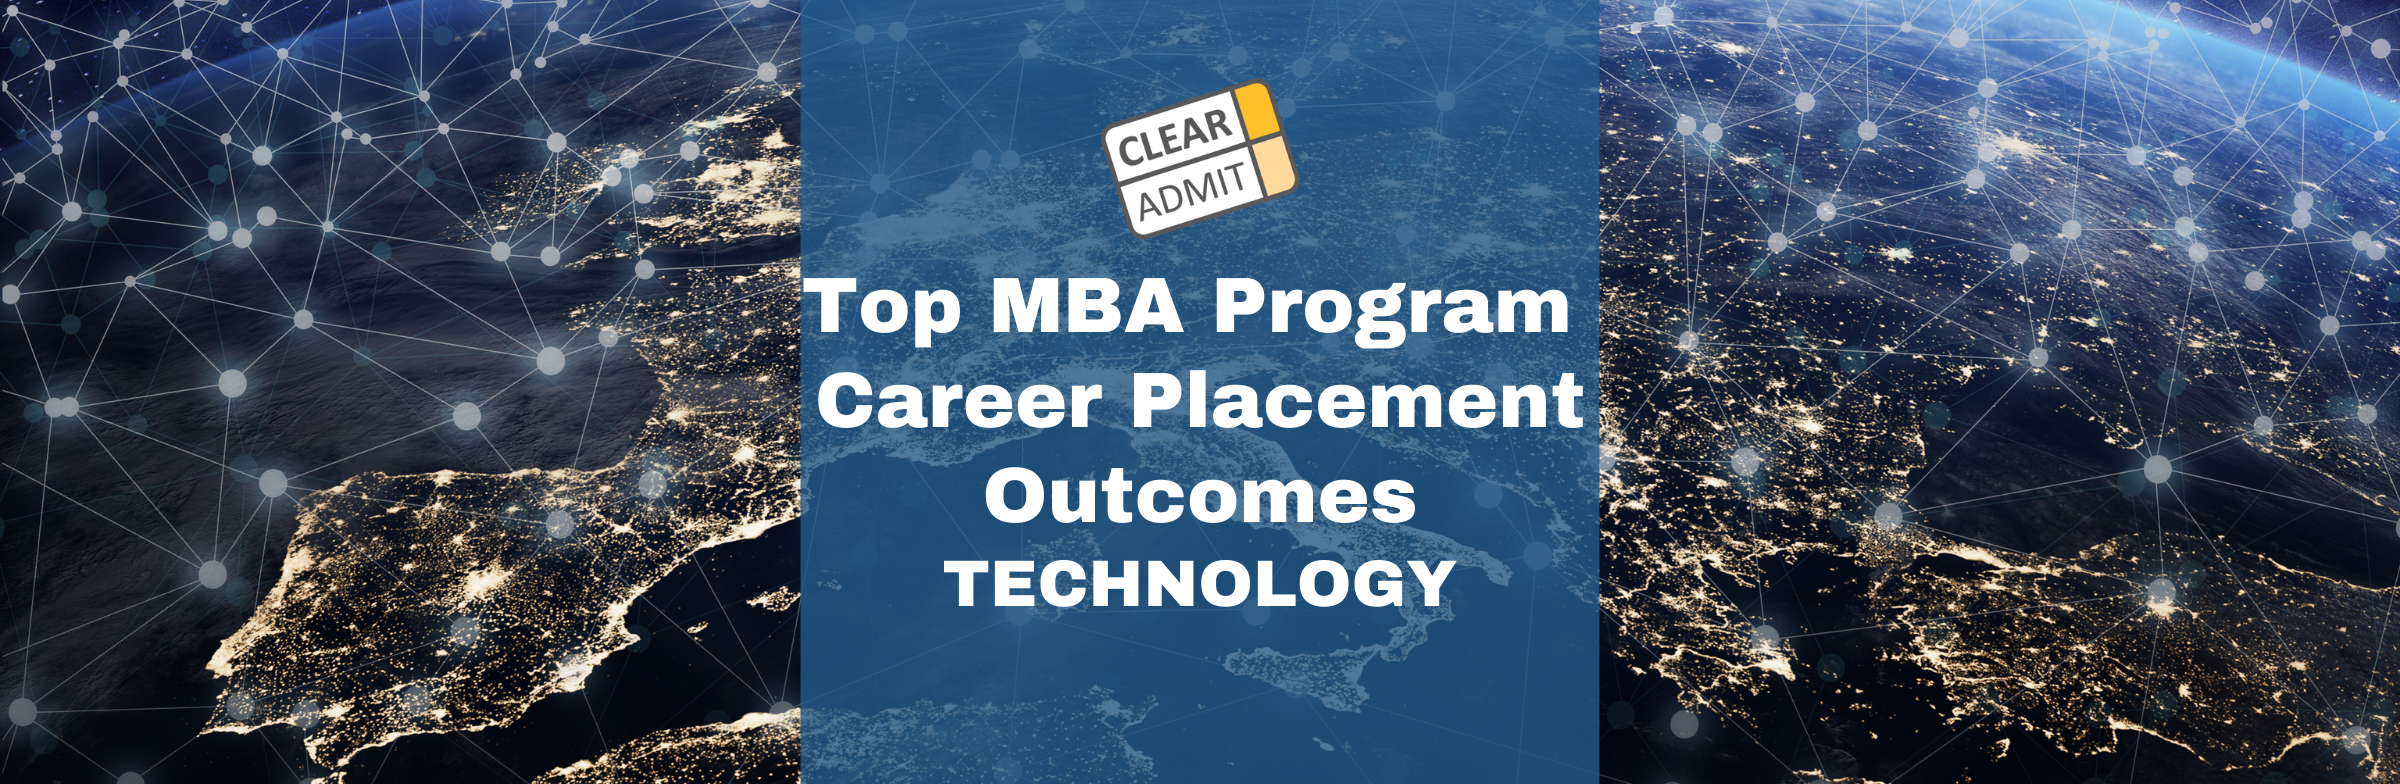 Image for Top MBA Program Career Placement Outcomes: U.S. Graduates Pursuing Post-MBA Careers in Tech